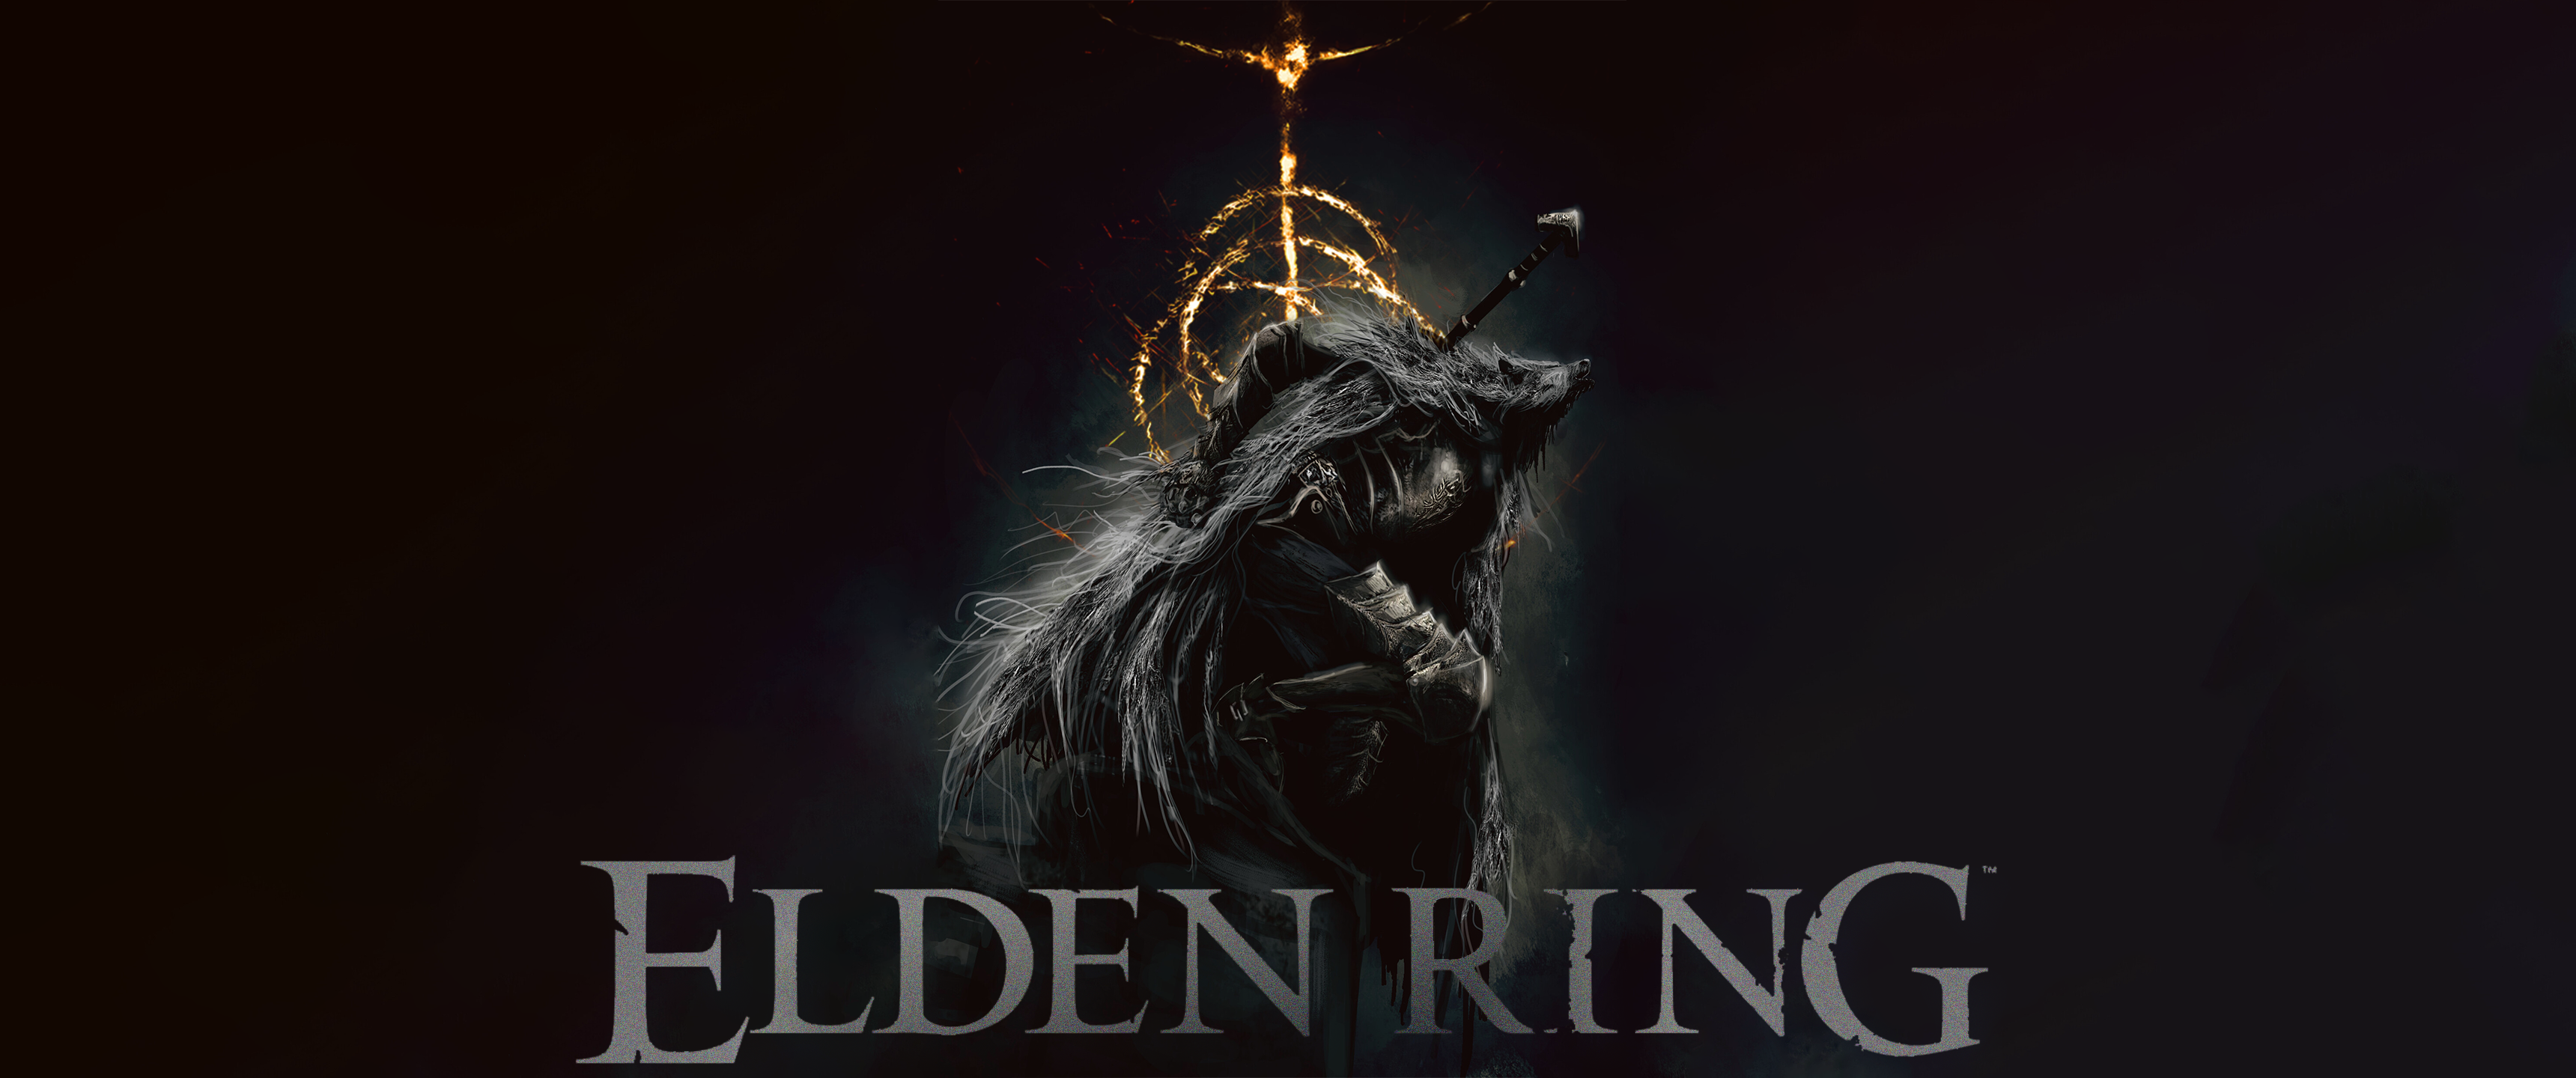 Didn T Find Any Cool Ultrawide Elden Ring Wallpaper So I Made My